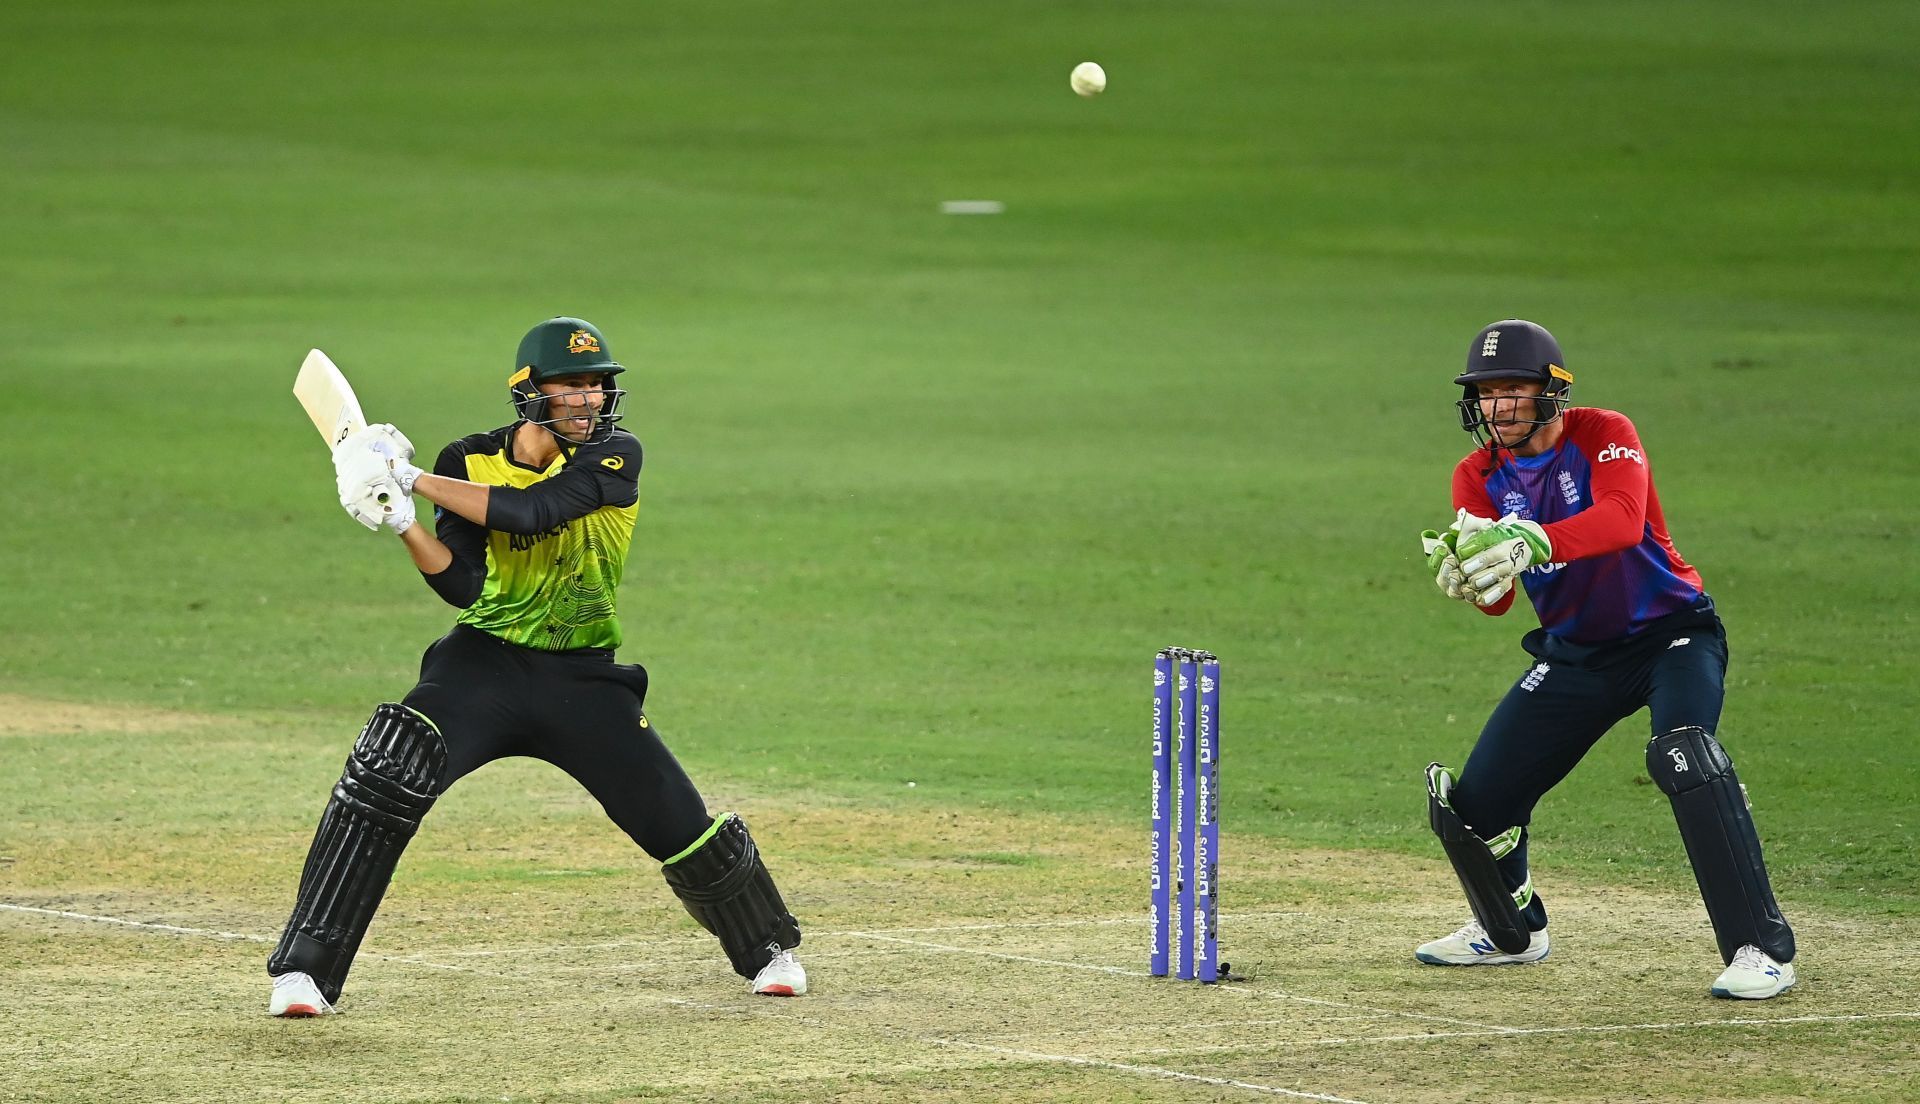 Agar chipped in with a valuable contribution with the bat as well against England